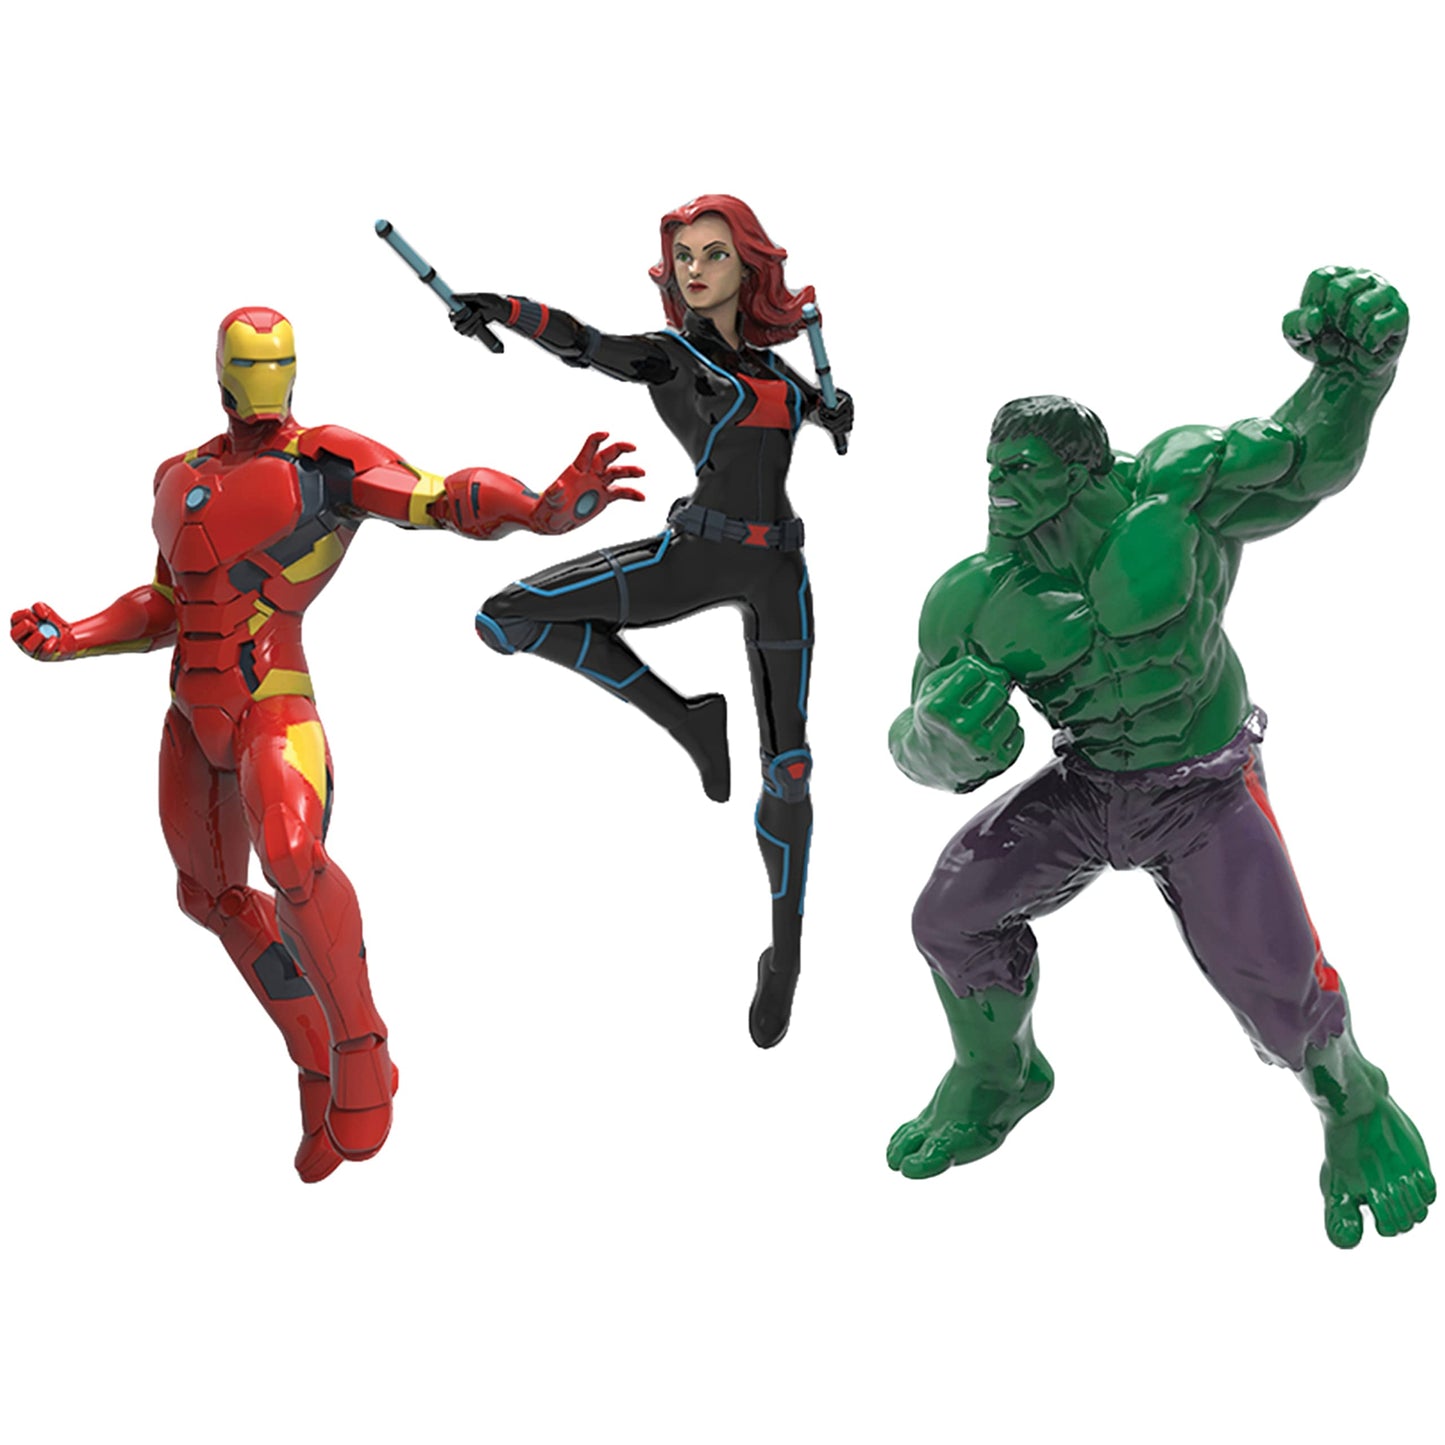 SwimWays Marvel Avengers Dive Characters Diving Toys (3 Pack), Bath Toys & Pool Party Supplies for Kids Ages 5 and Up